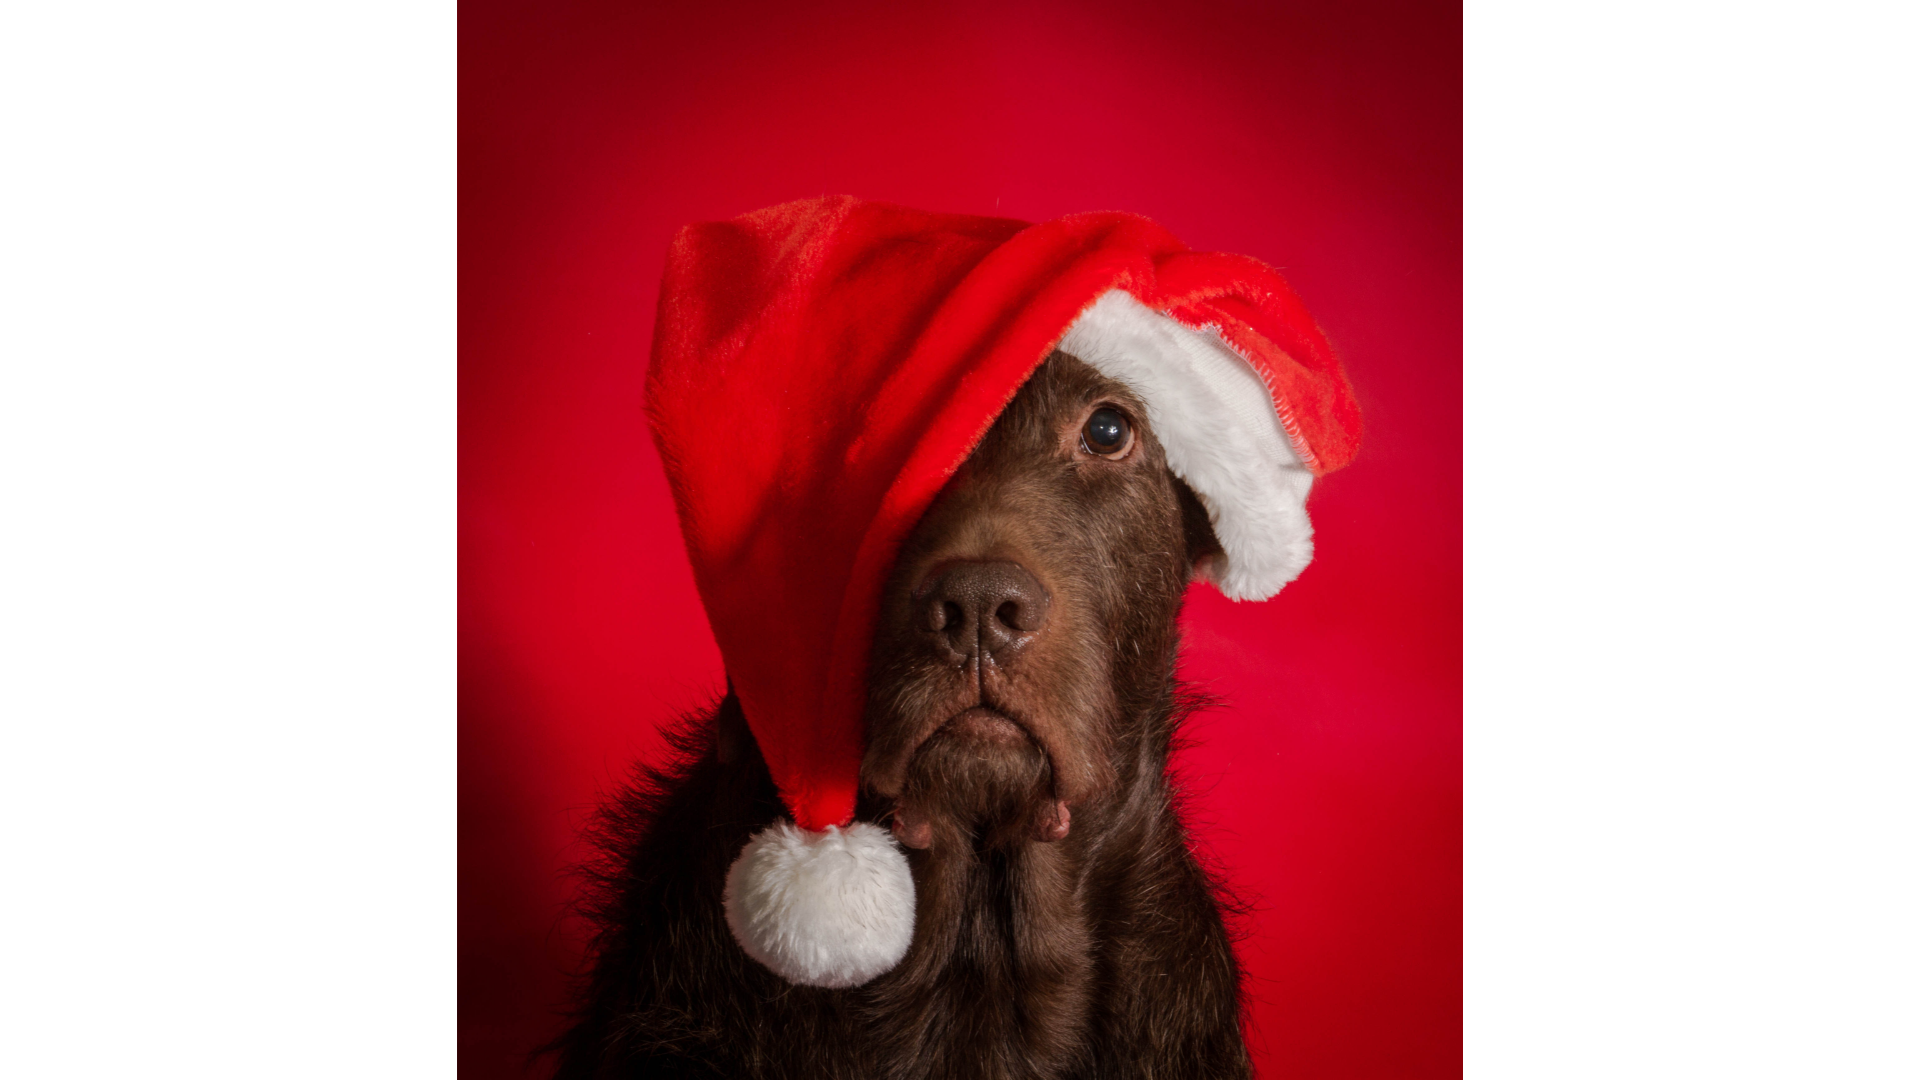 A brown dog wearing a santa hat on a red background.